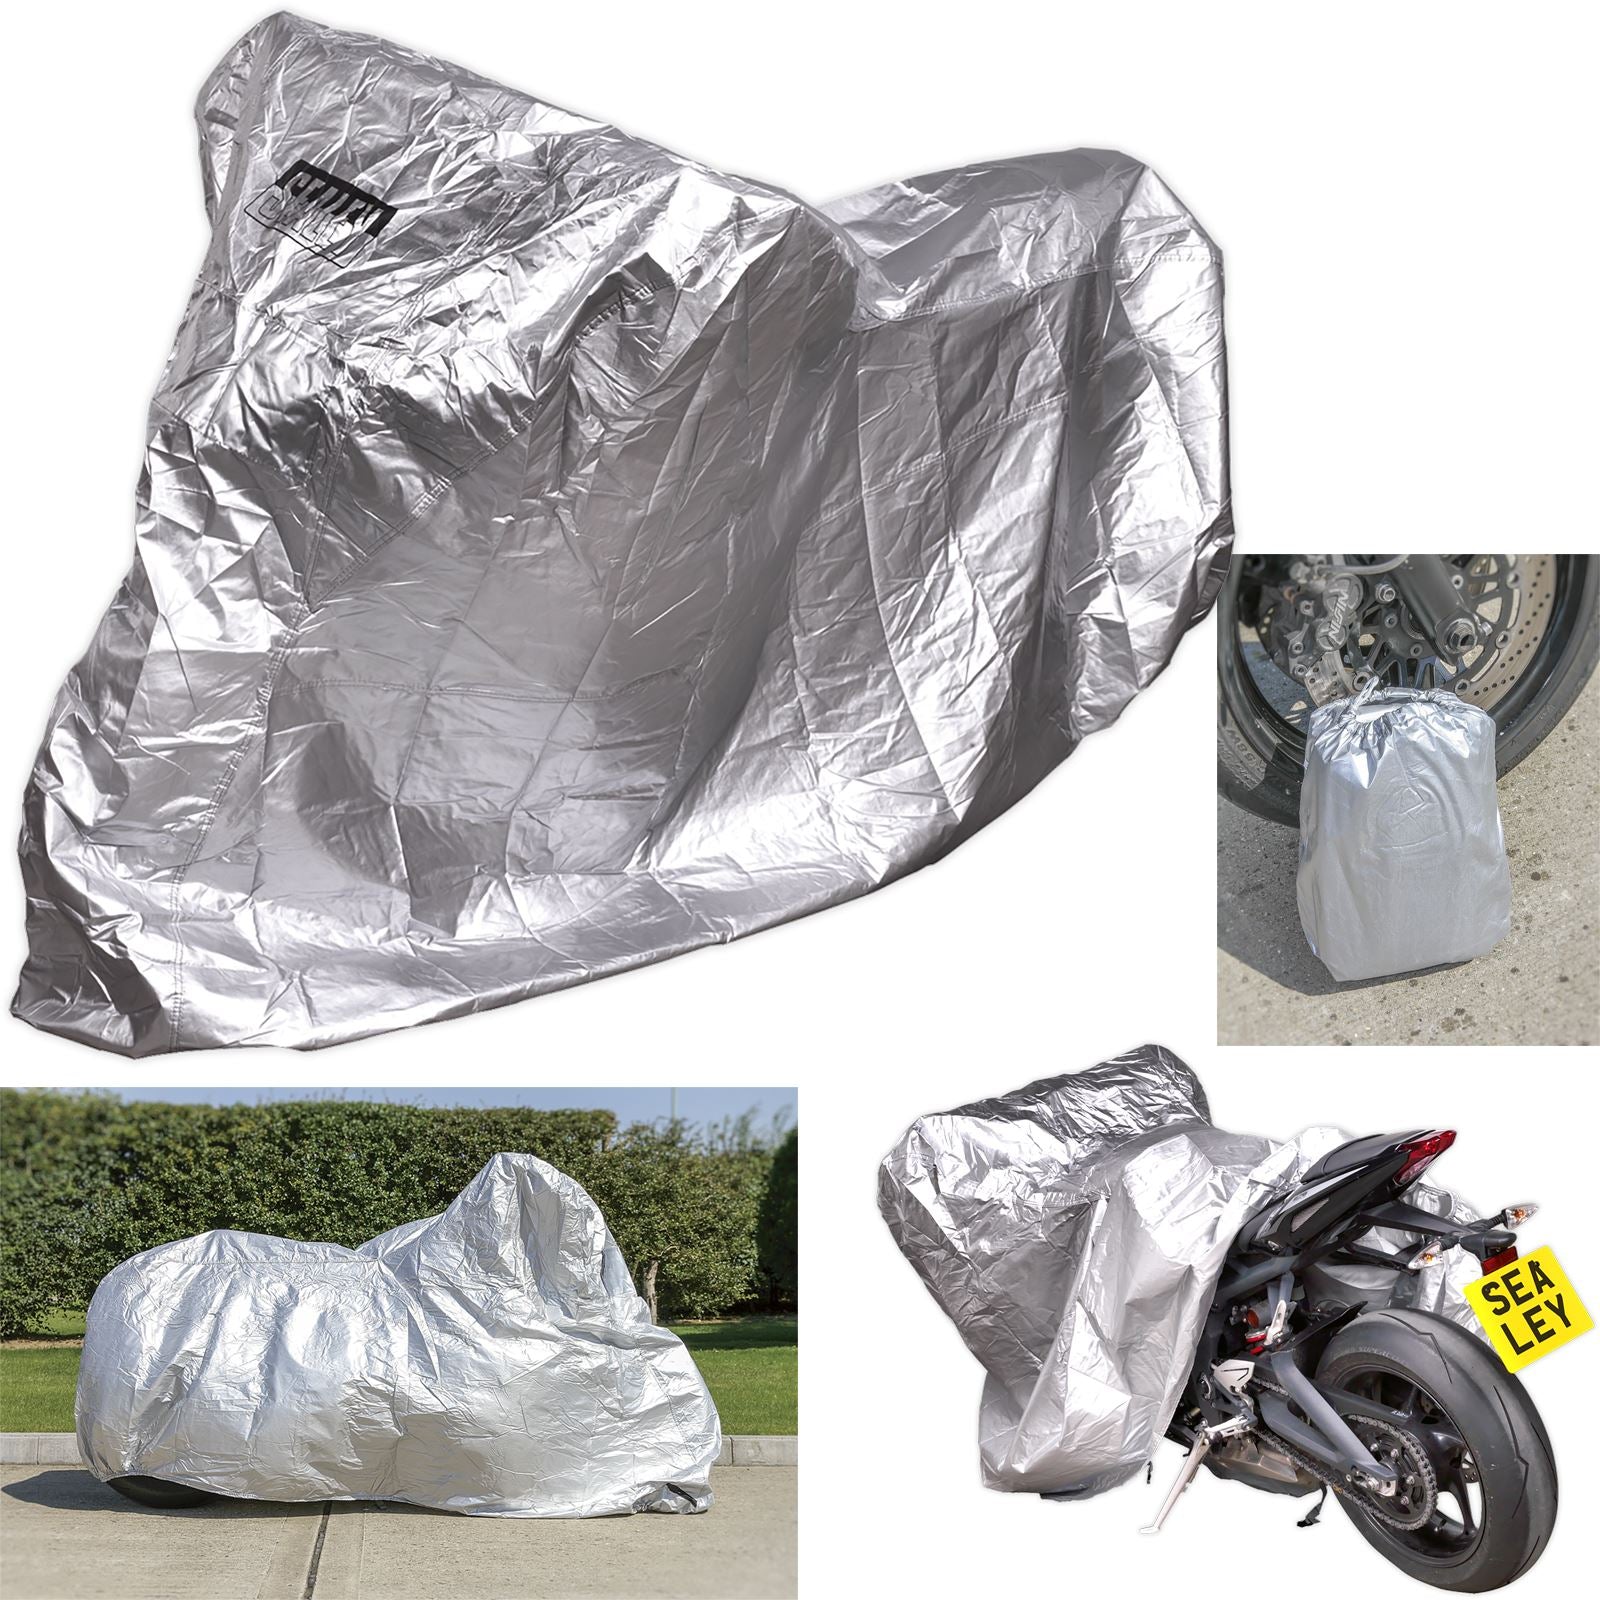 Sealey Motorcycle Cover 2320 x 1000 x 1350mm - Medium